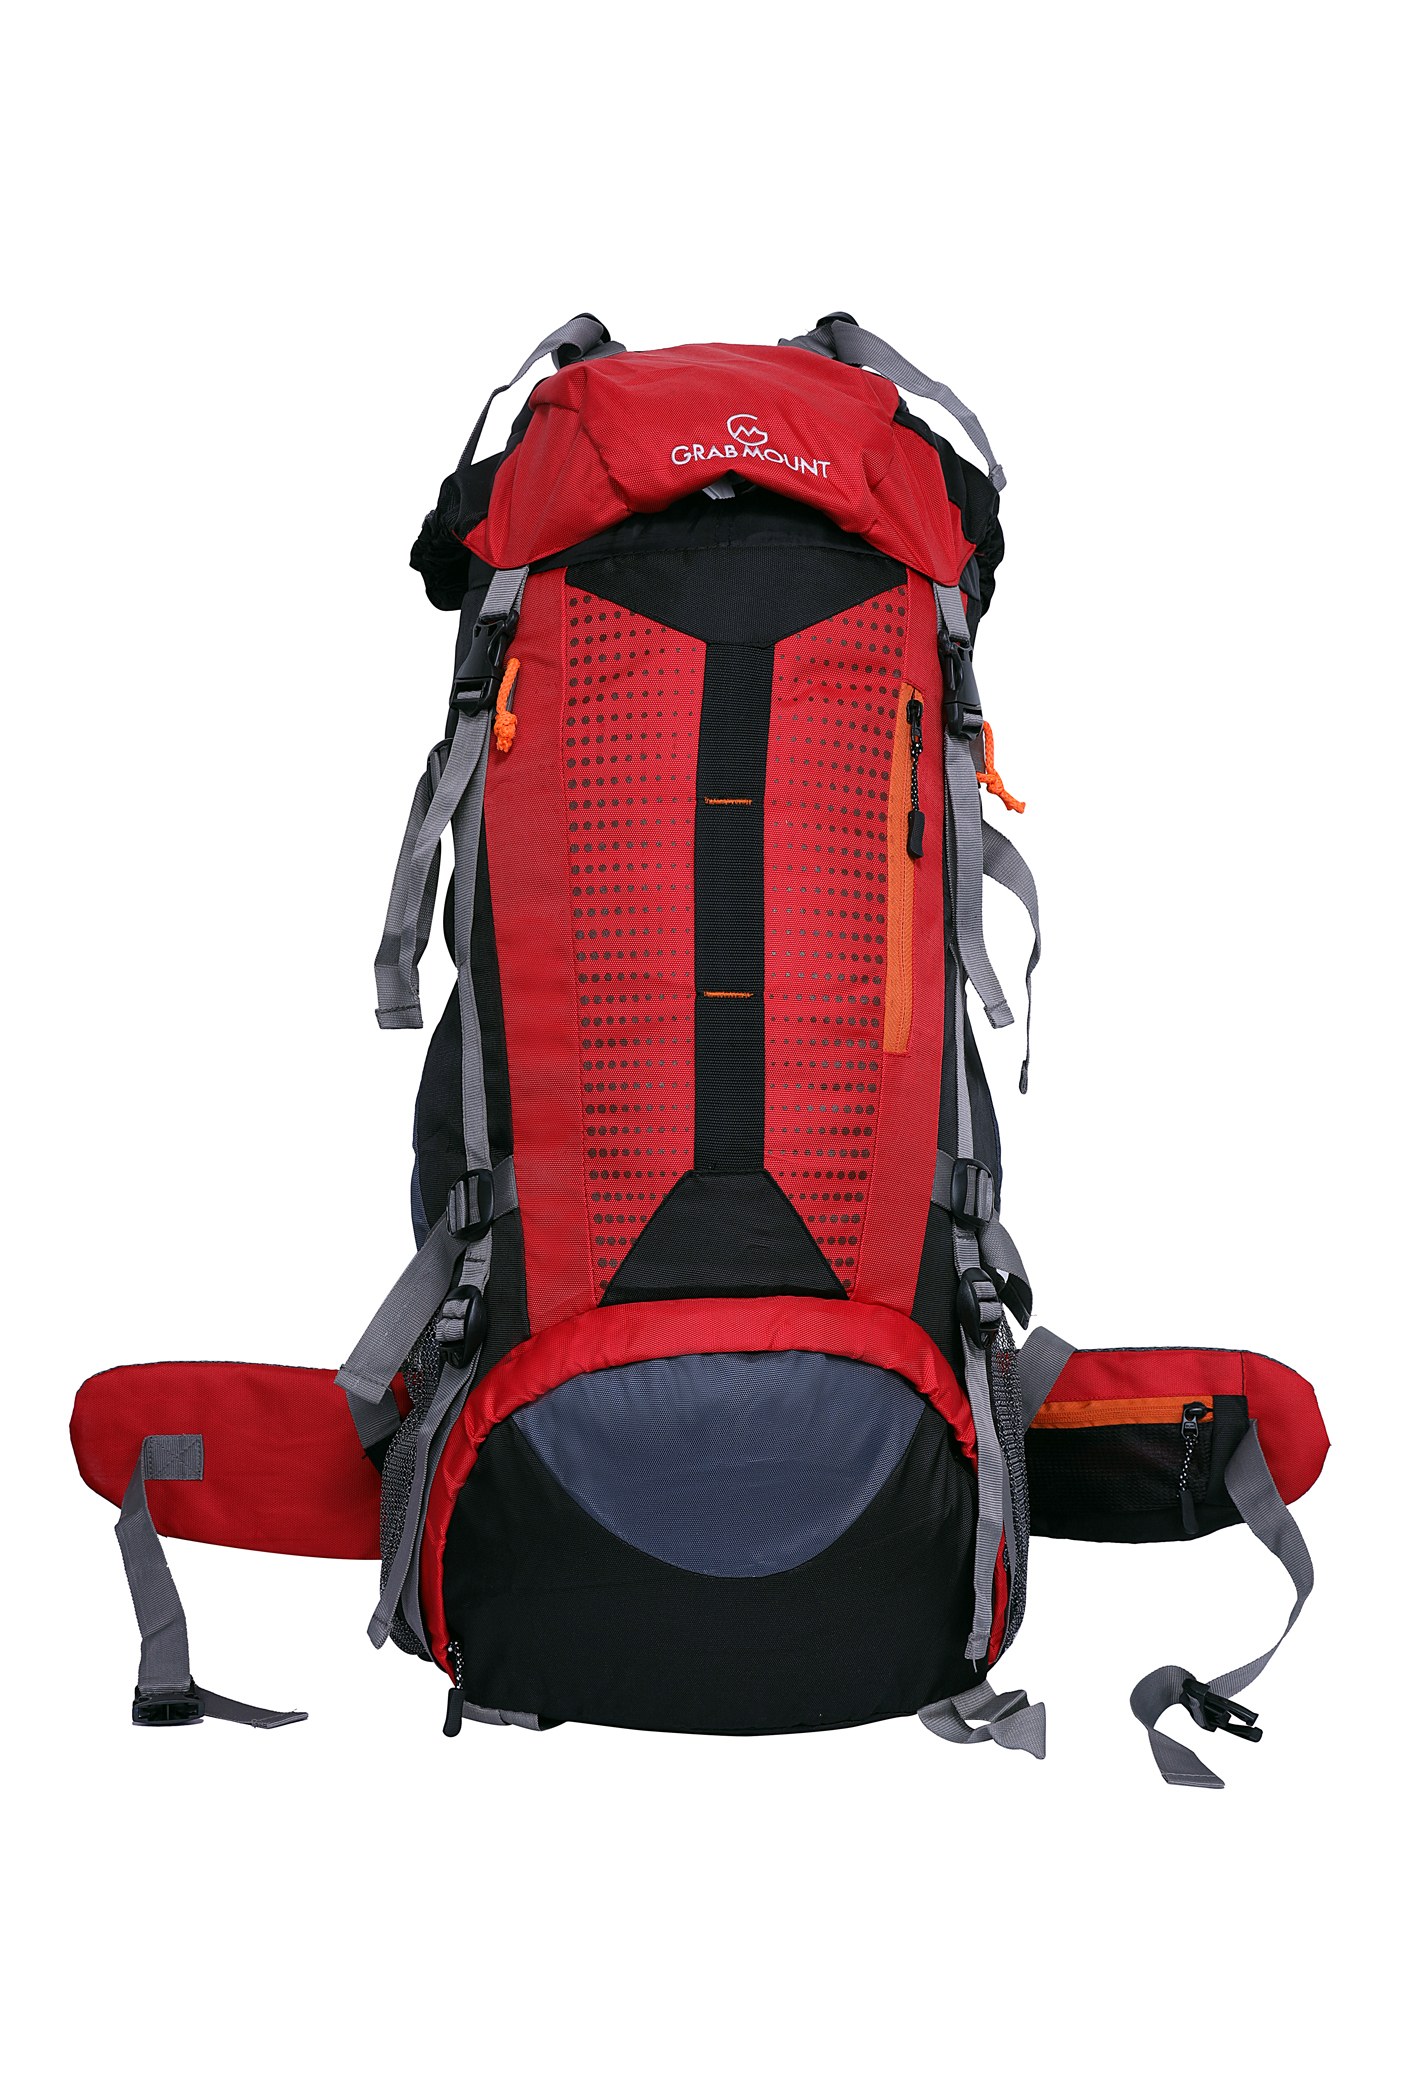 Bags Hiking Bag in Rucksack 65 ltr Travel Backpack for Adventure Camping Trekking Bag with Rain Cover  laptop comp RED